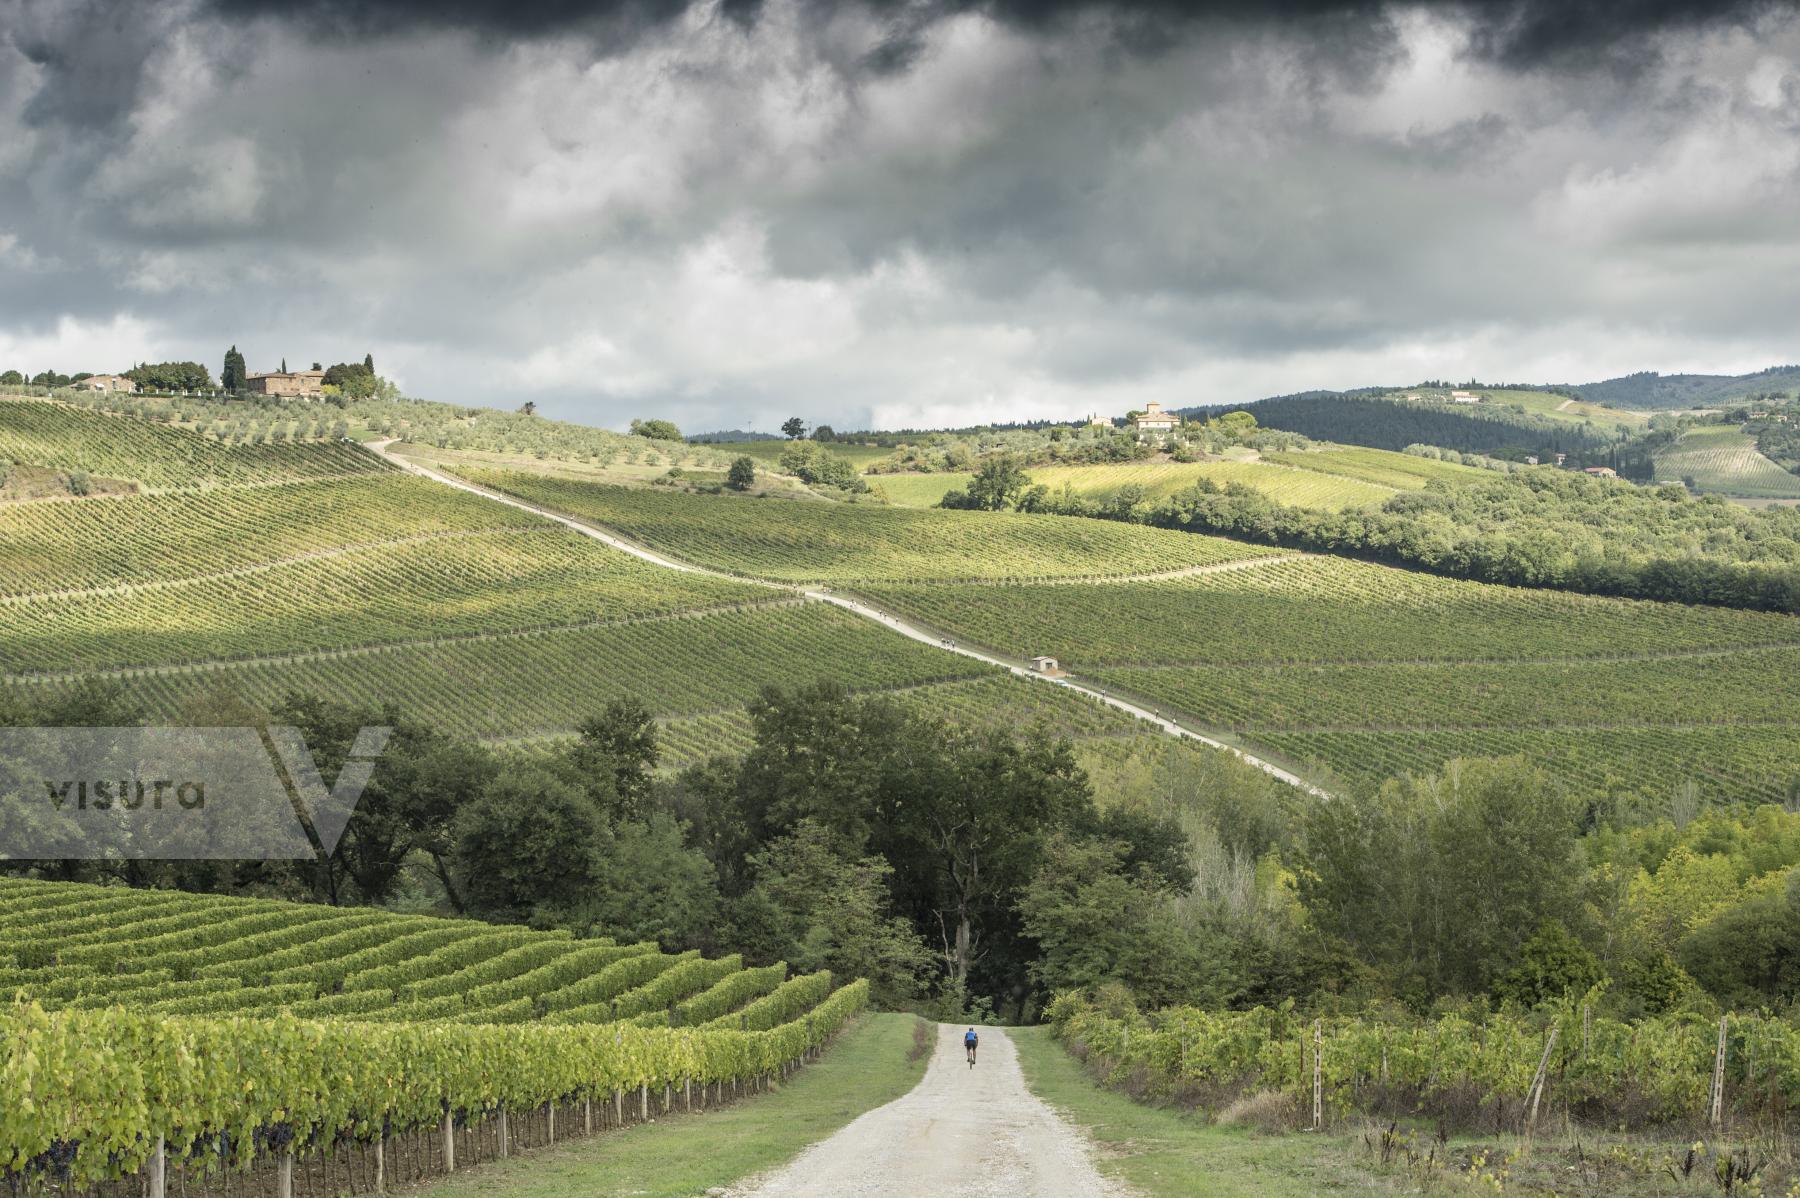 Purchase Chiantishire hills and vineyards by Nicola Ughi